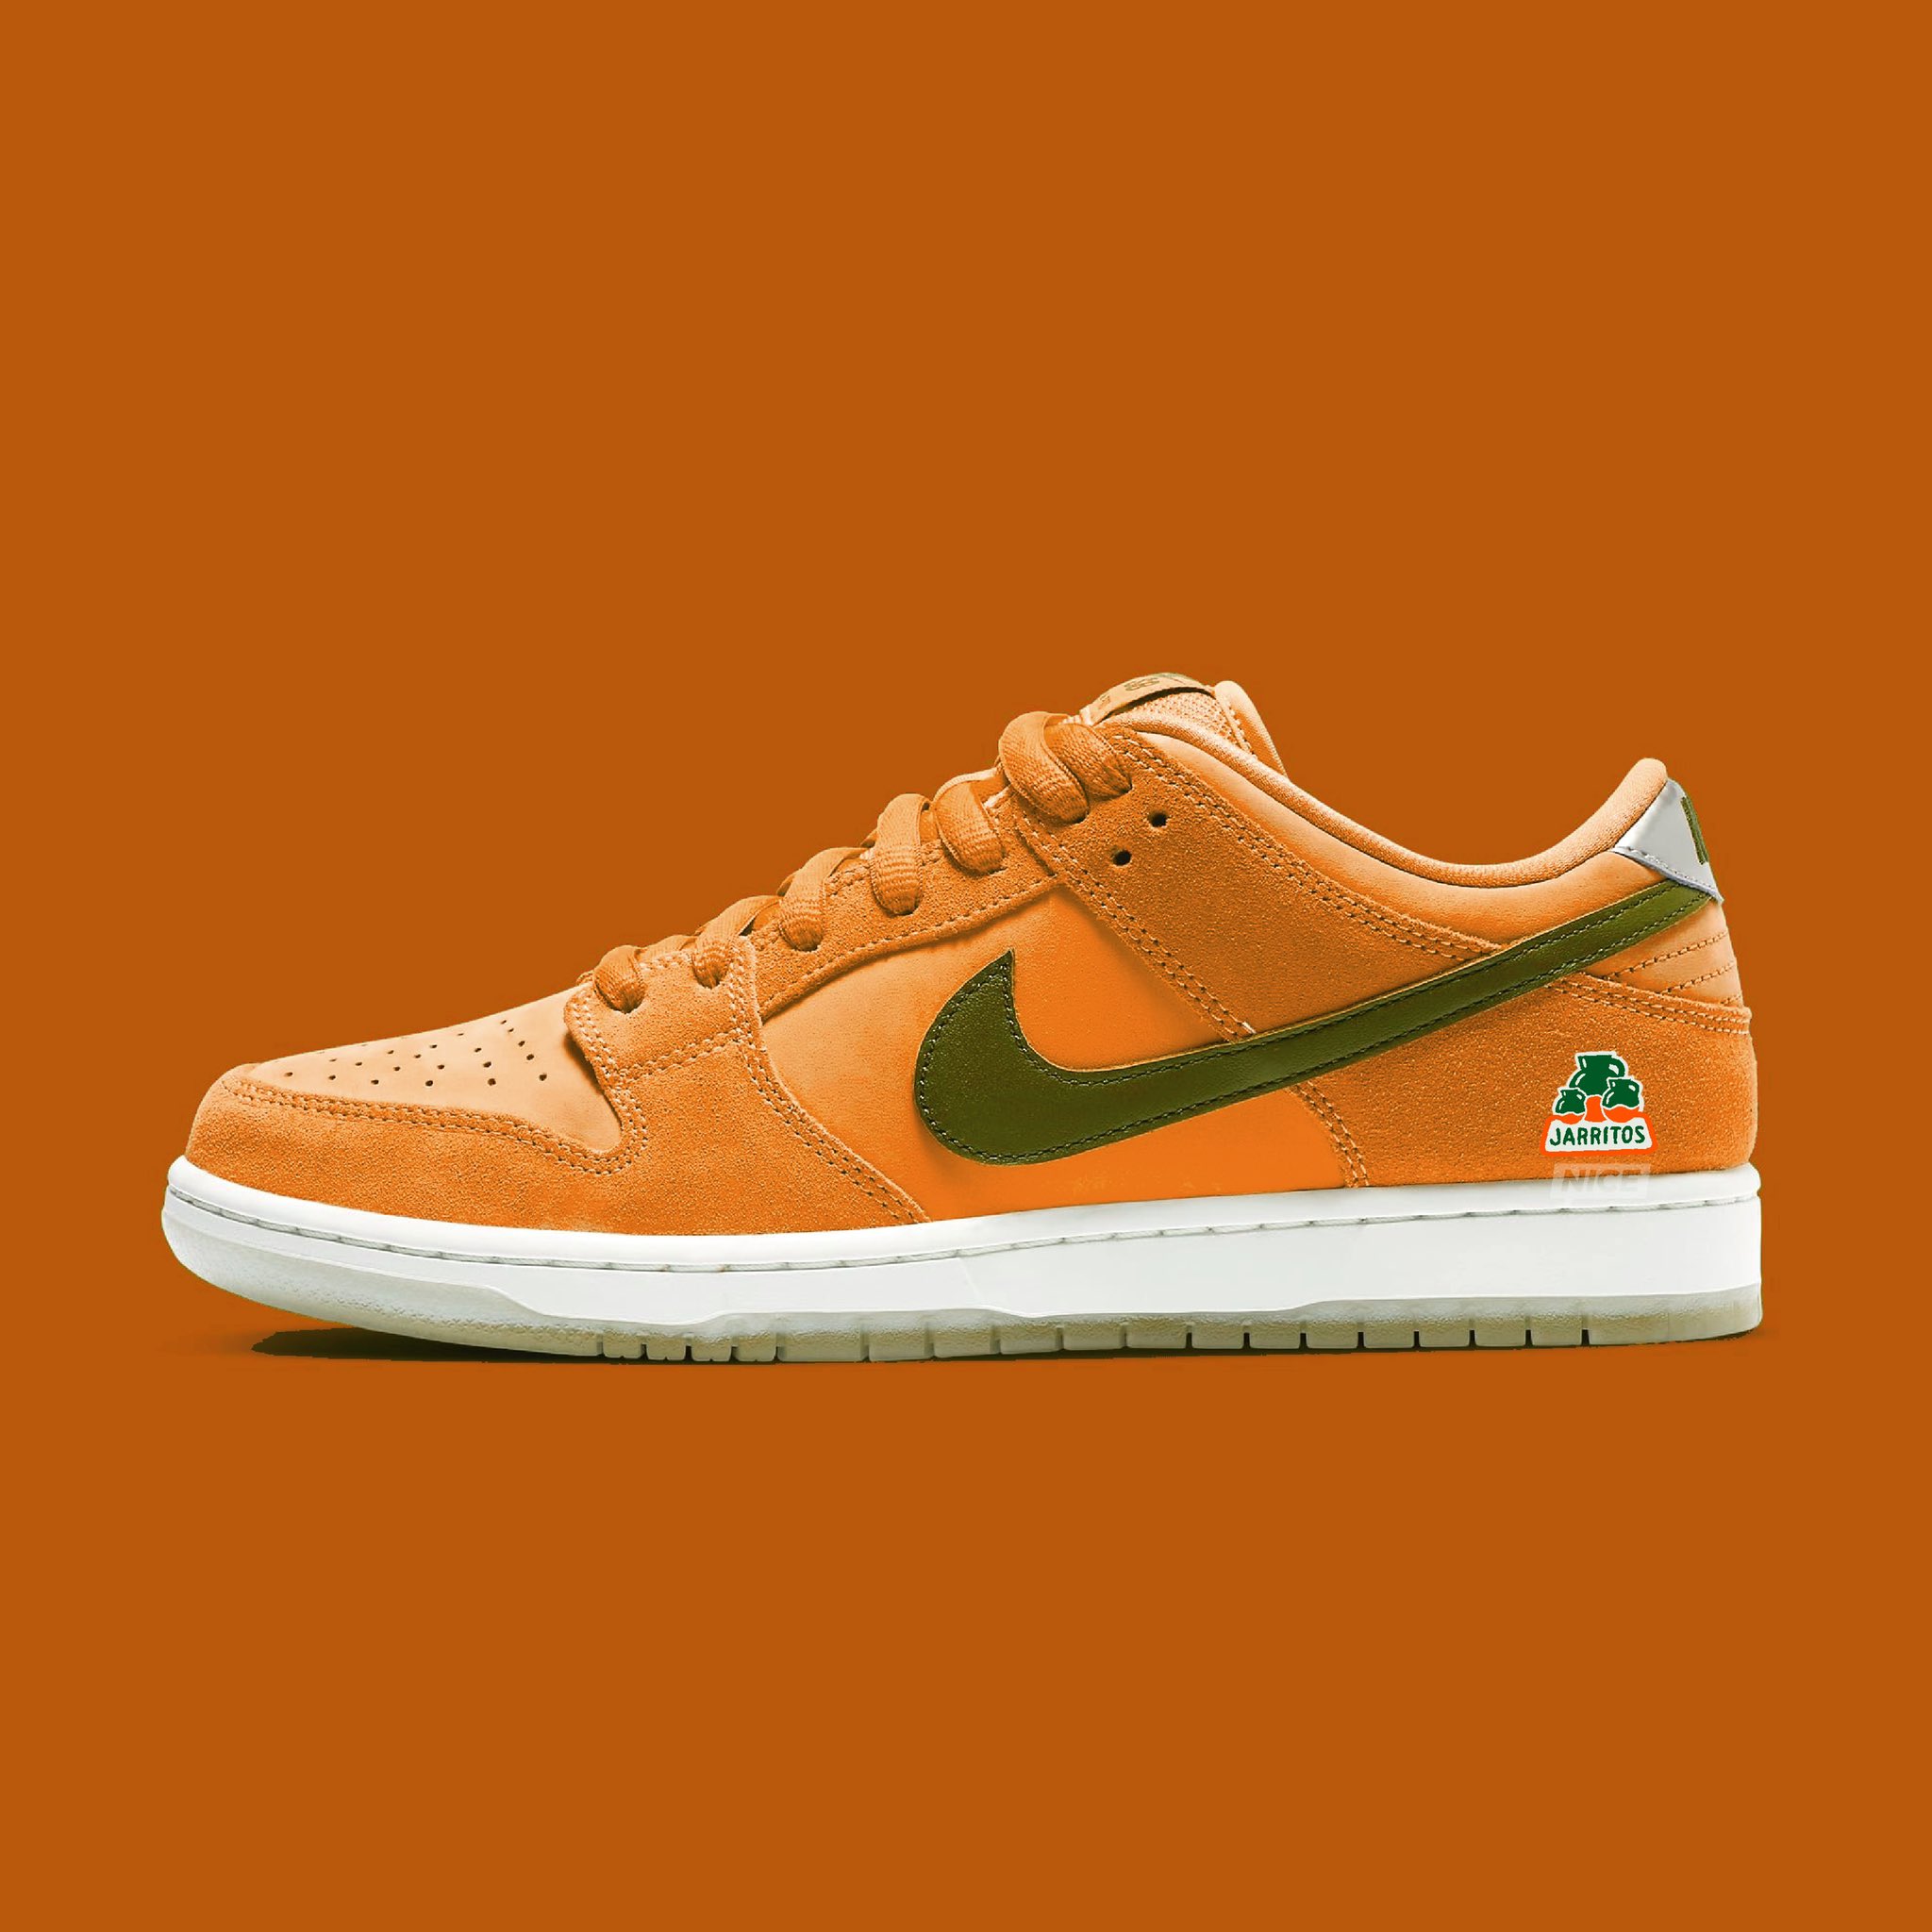 traducir inoxidable girar Nice Kicks on Twitter: "Jarritos x Nike SB Dunk Lows are set for 2023, per  @Complex 🥂 What flavors do you want to see?🍊🍍🍋 https://t.co/mdwBddproQ"  / Twitter